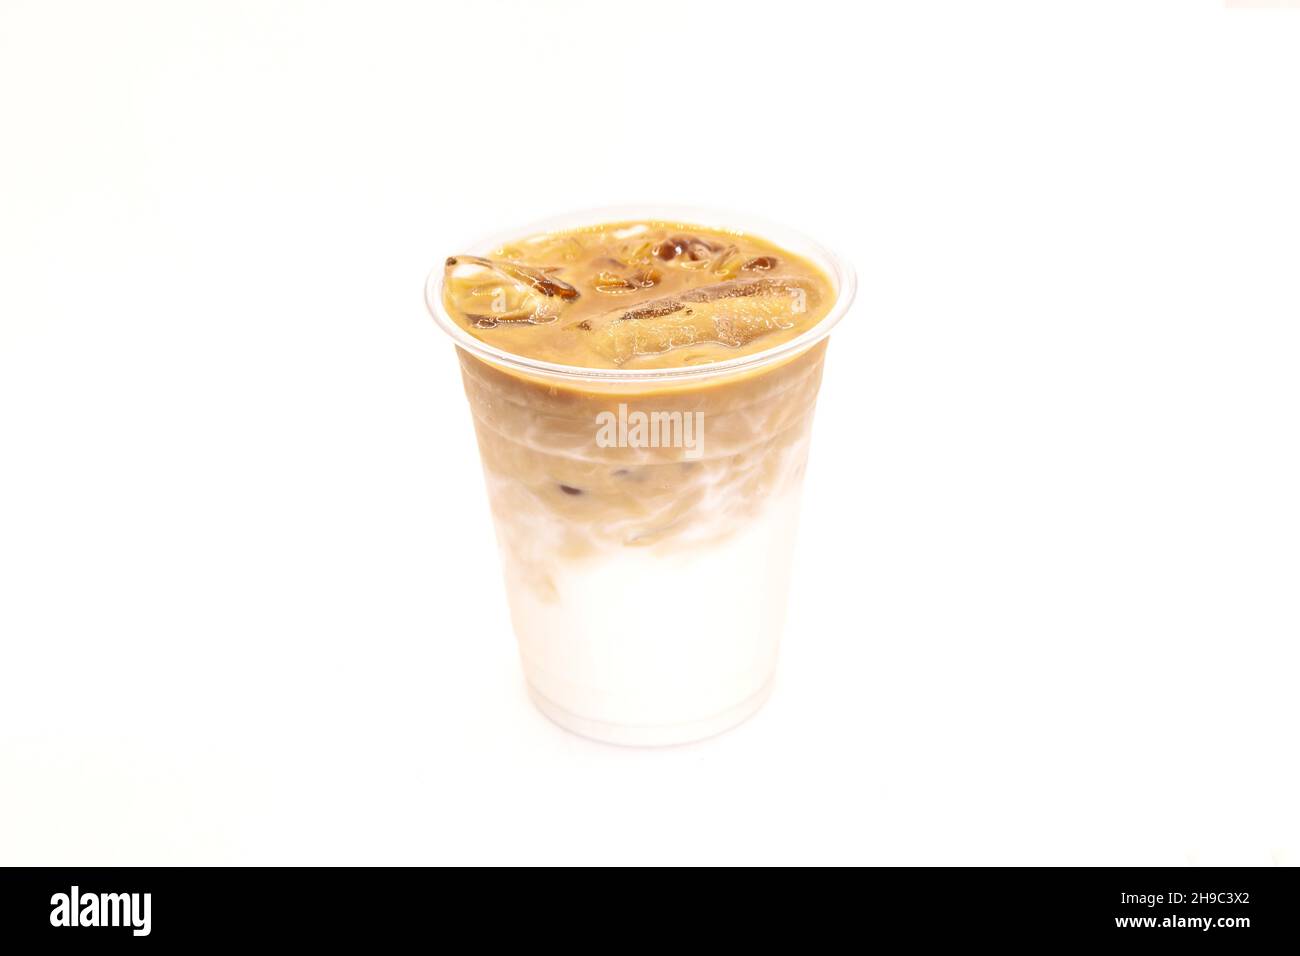 https://c8.alamy.com/comp/2H9C3X2/vanilla-iced-latte-served-in-a-plastic-to-go-cup-2H9C3X2.jpg